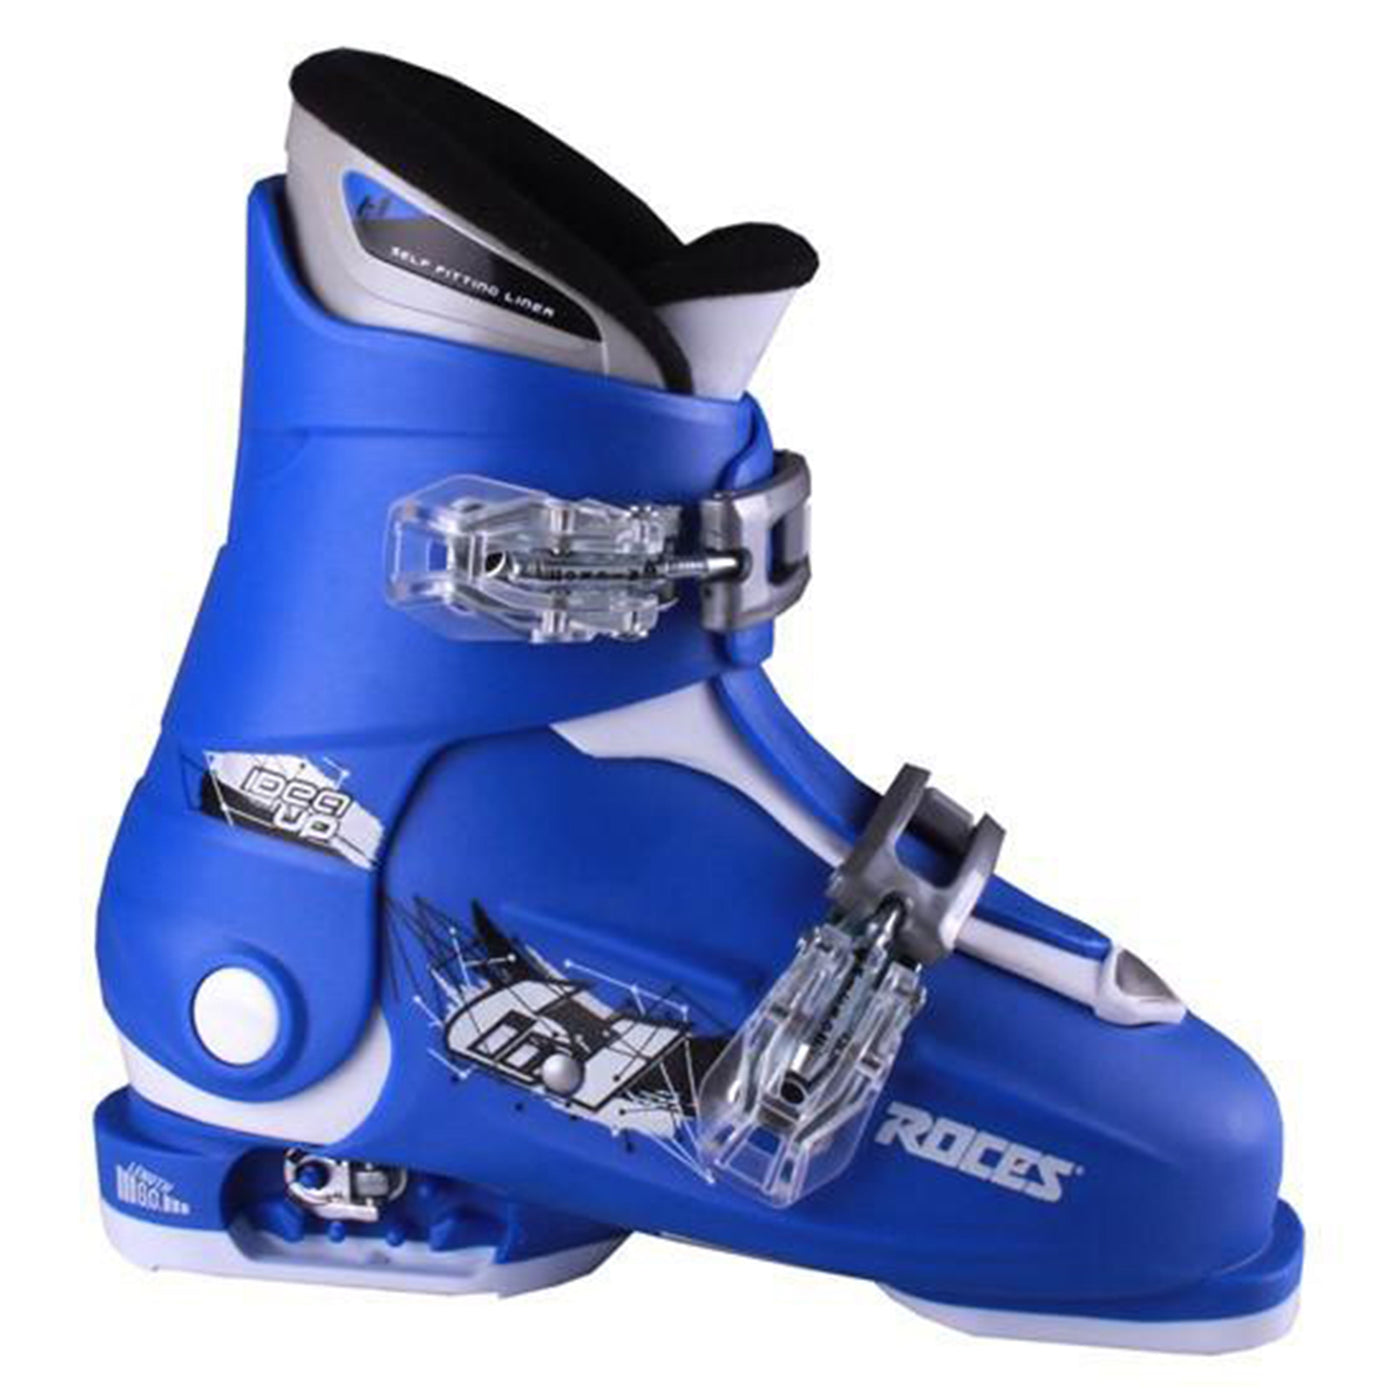 Roces IDEA Up Adjustable Youth Ski Boots | Size 19.0 - 22.0 MP - (OPEN BOX RETURN) SKI BOOTS Roces Blue/White  